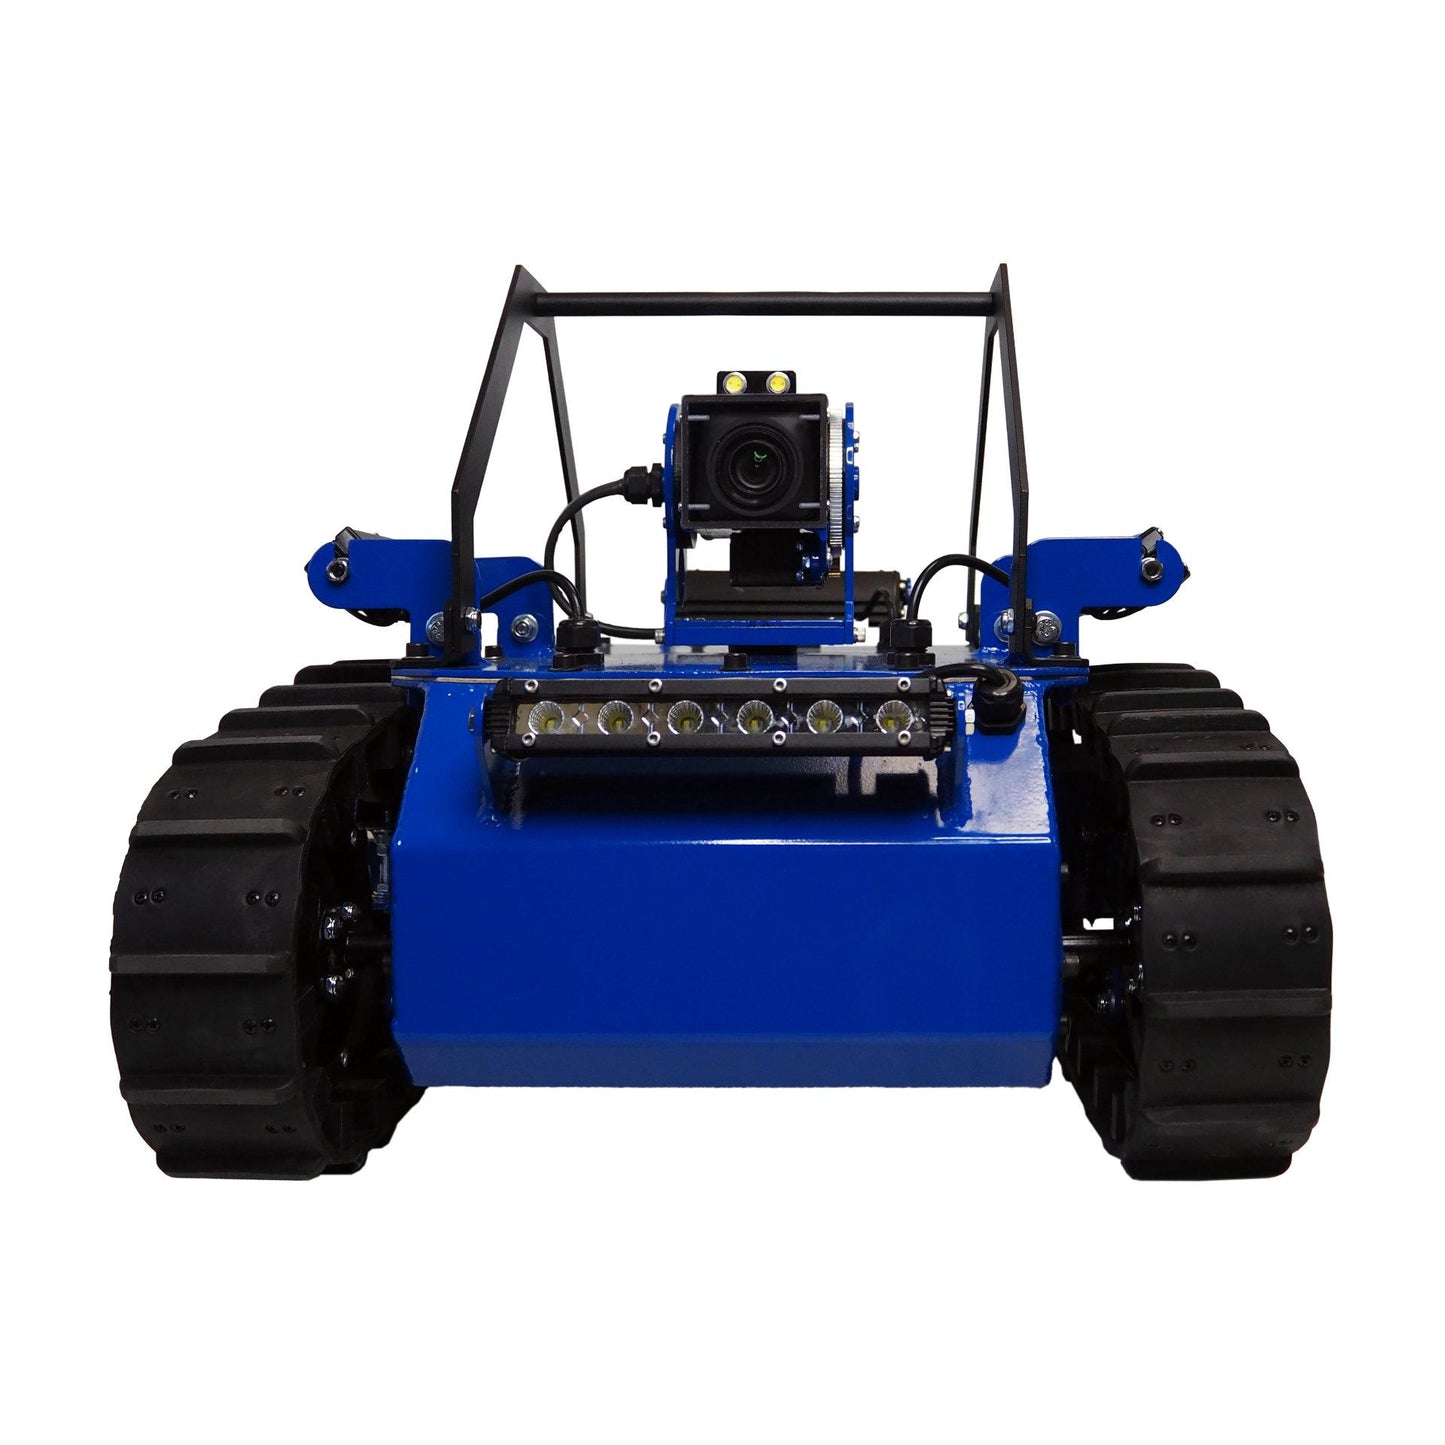 LT2-F-W Watertight Tethered Inspection Robot